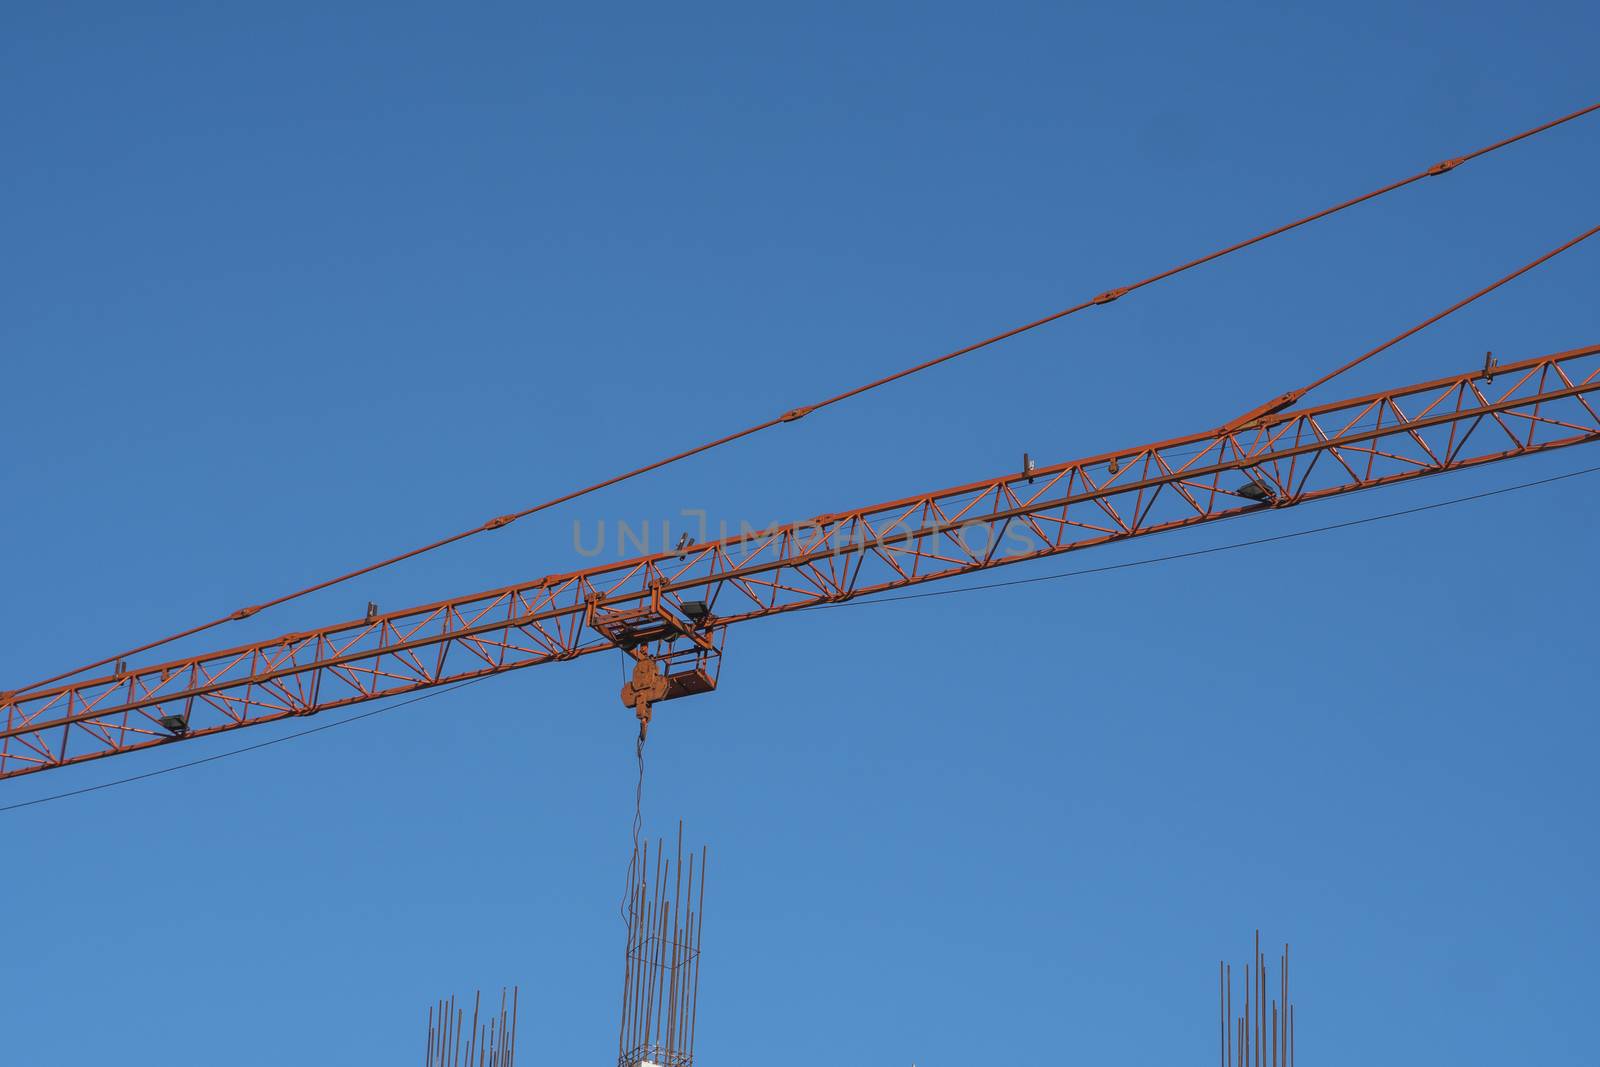 Tower crane against blue sky on a construction site for building of multi storage building or another type of structure